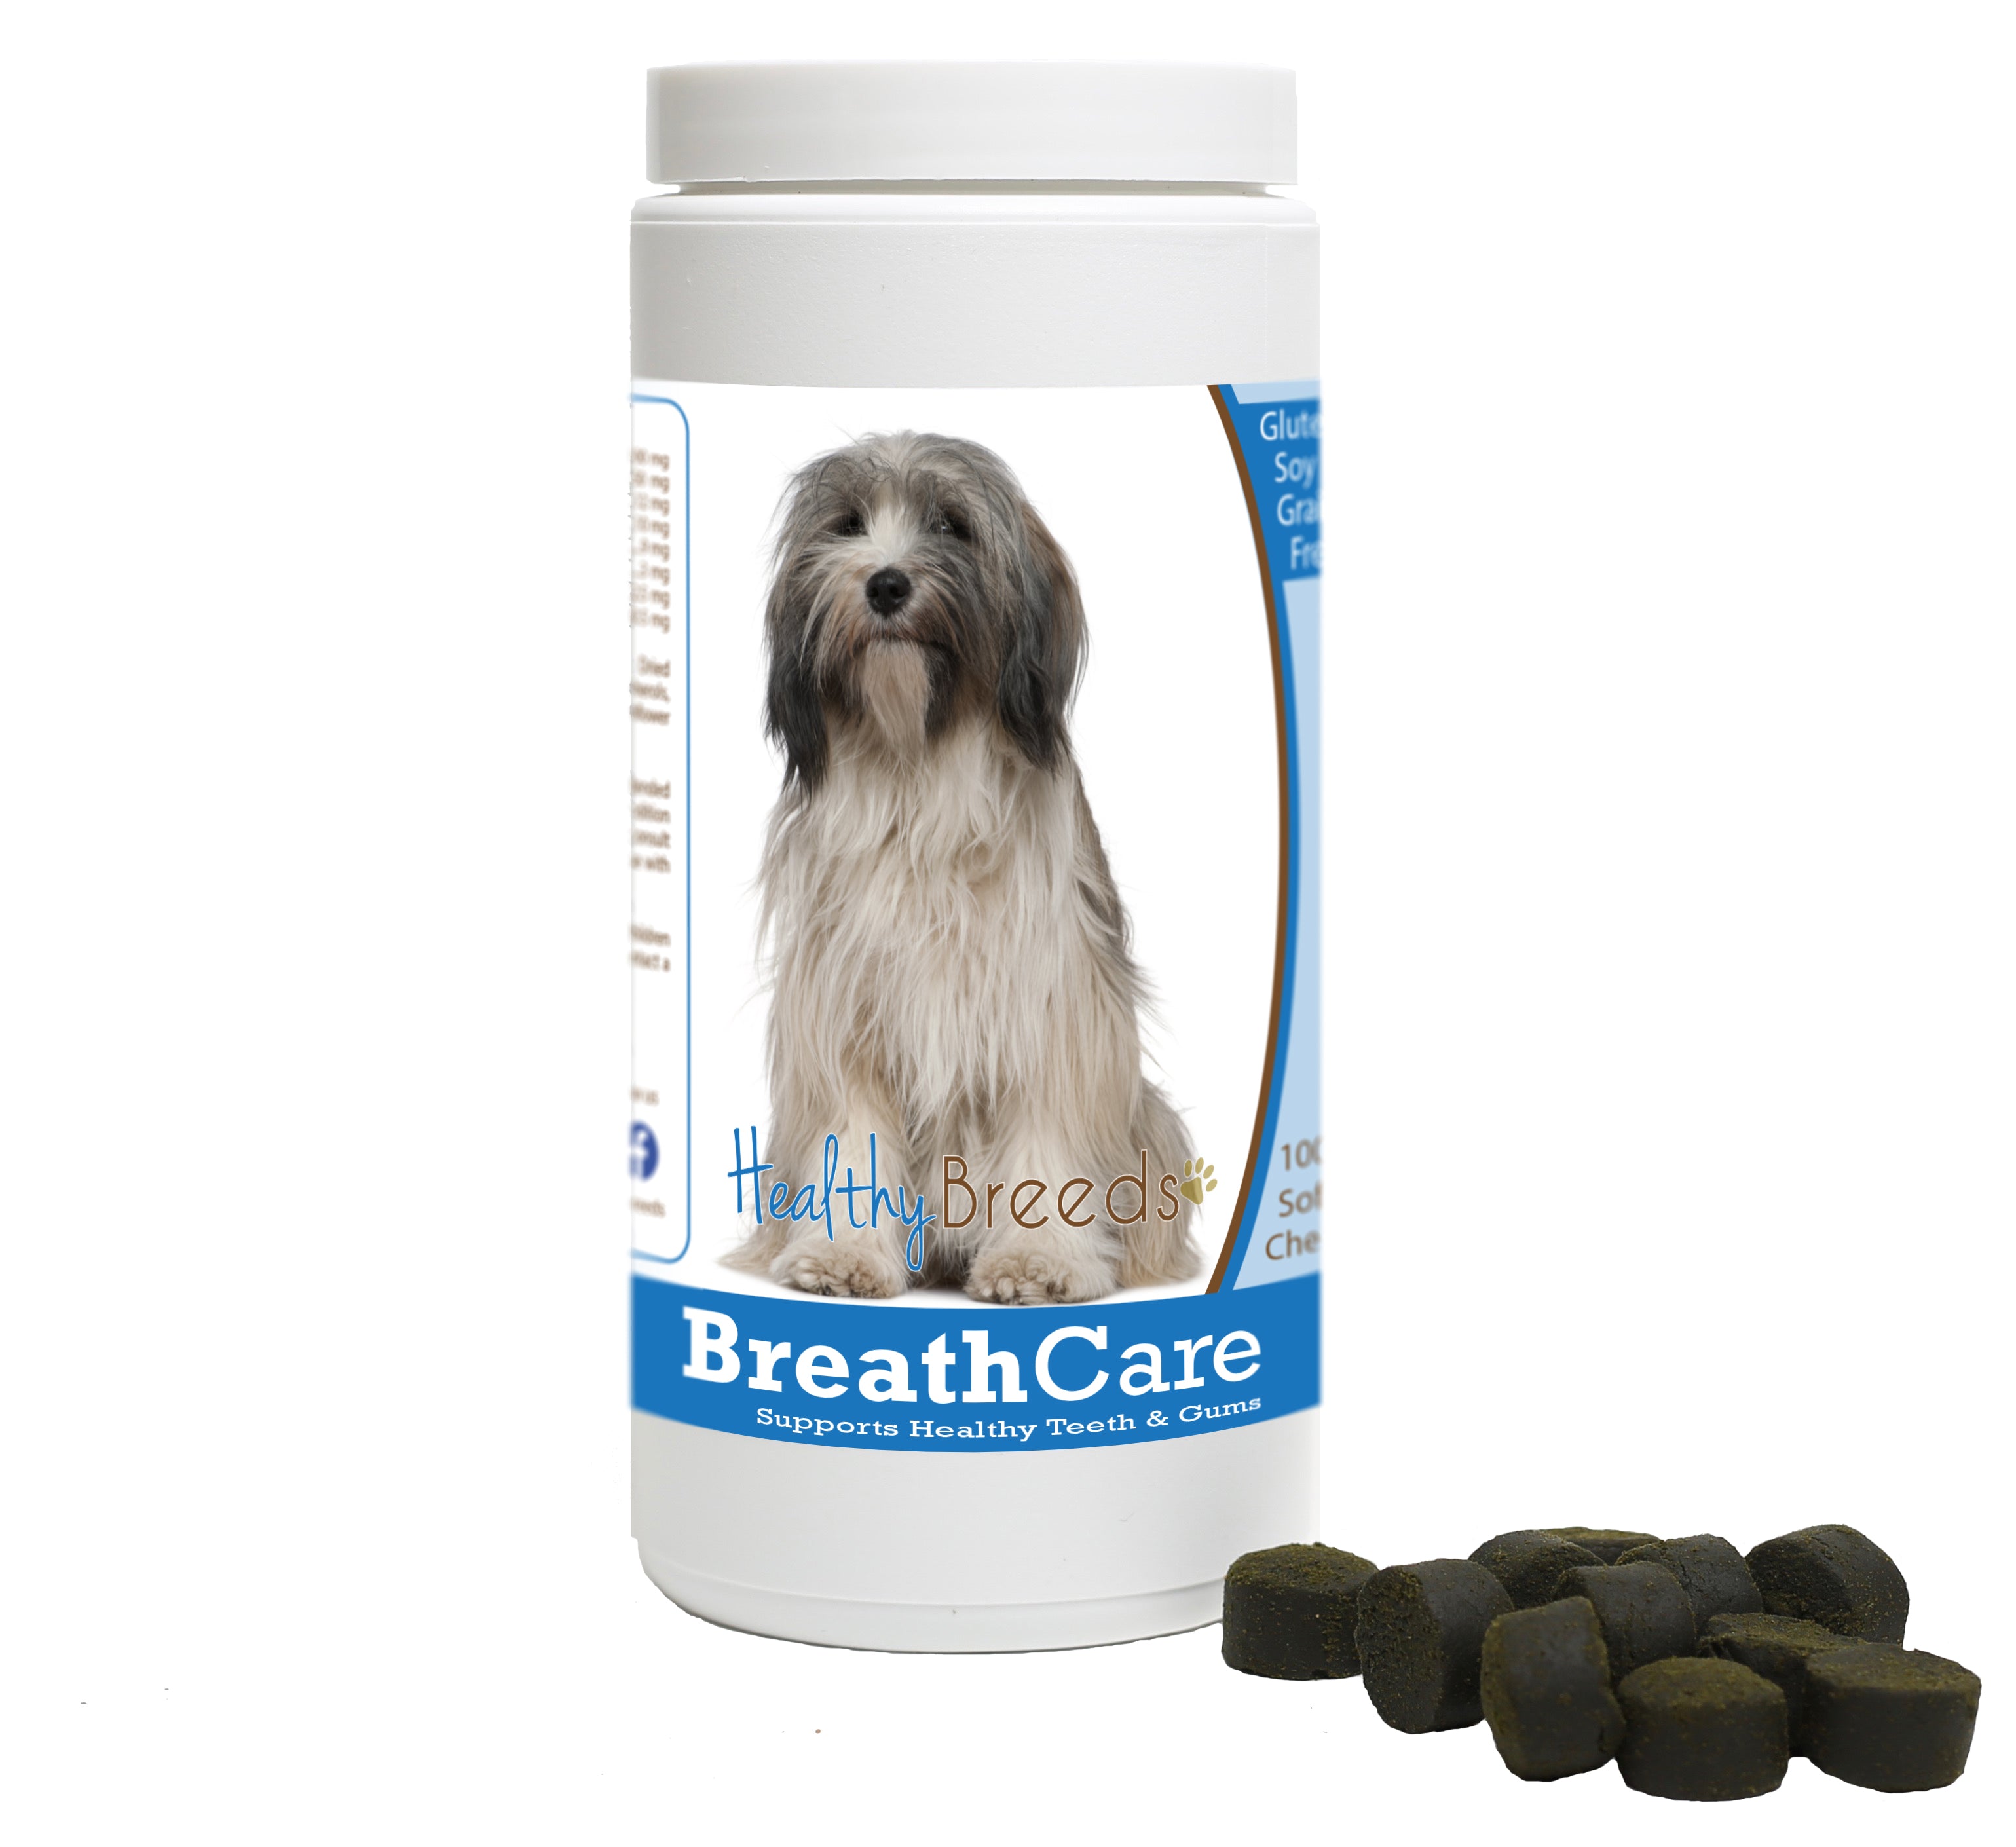 Tibetan Terrier Breath Care Soft Chews for Dogs 60 Count